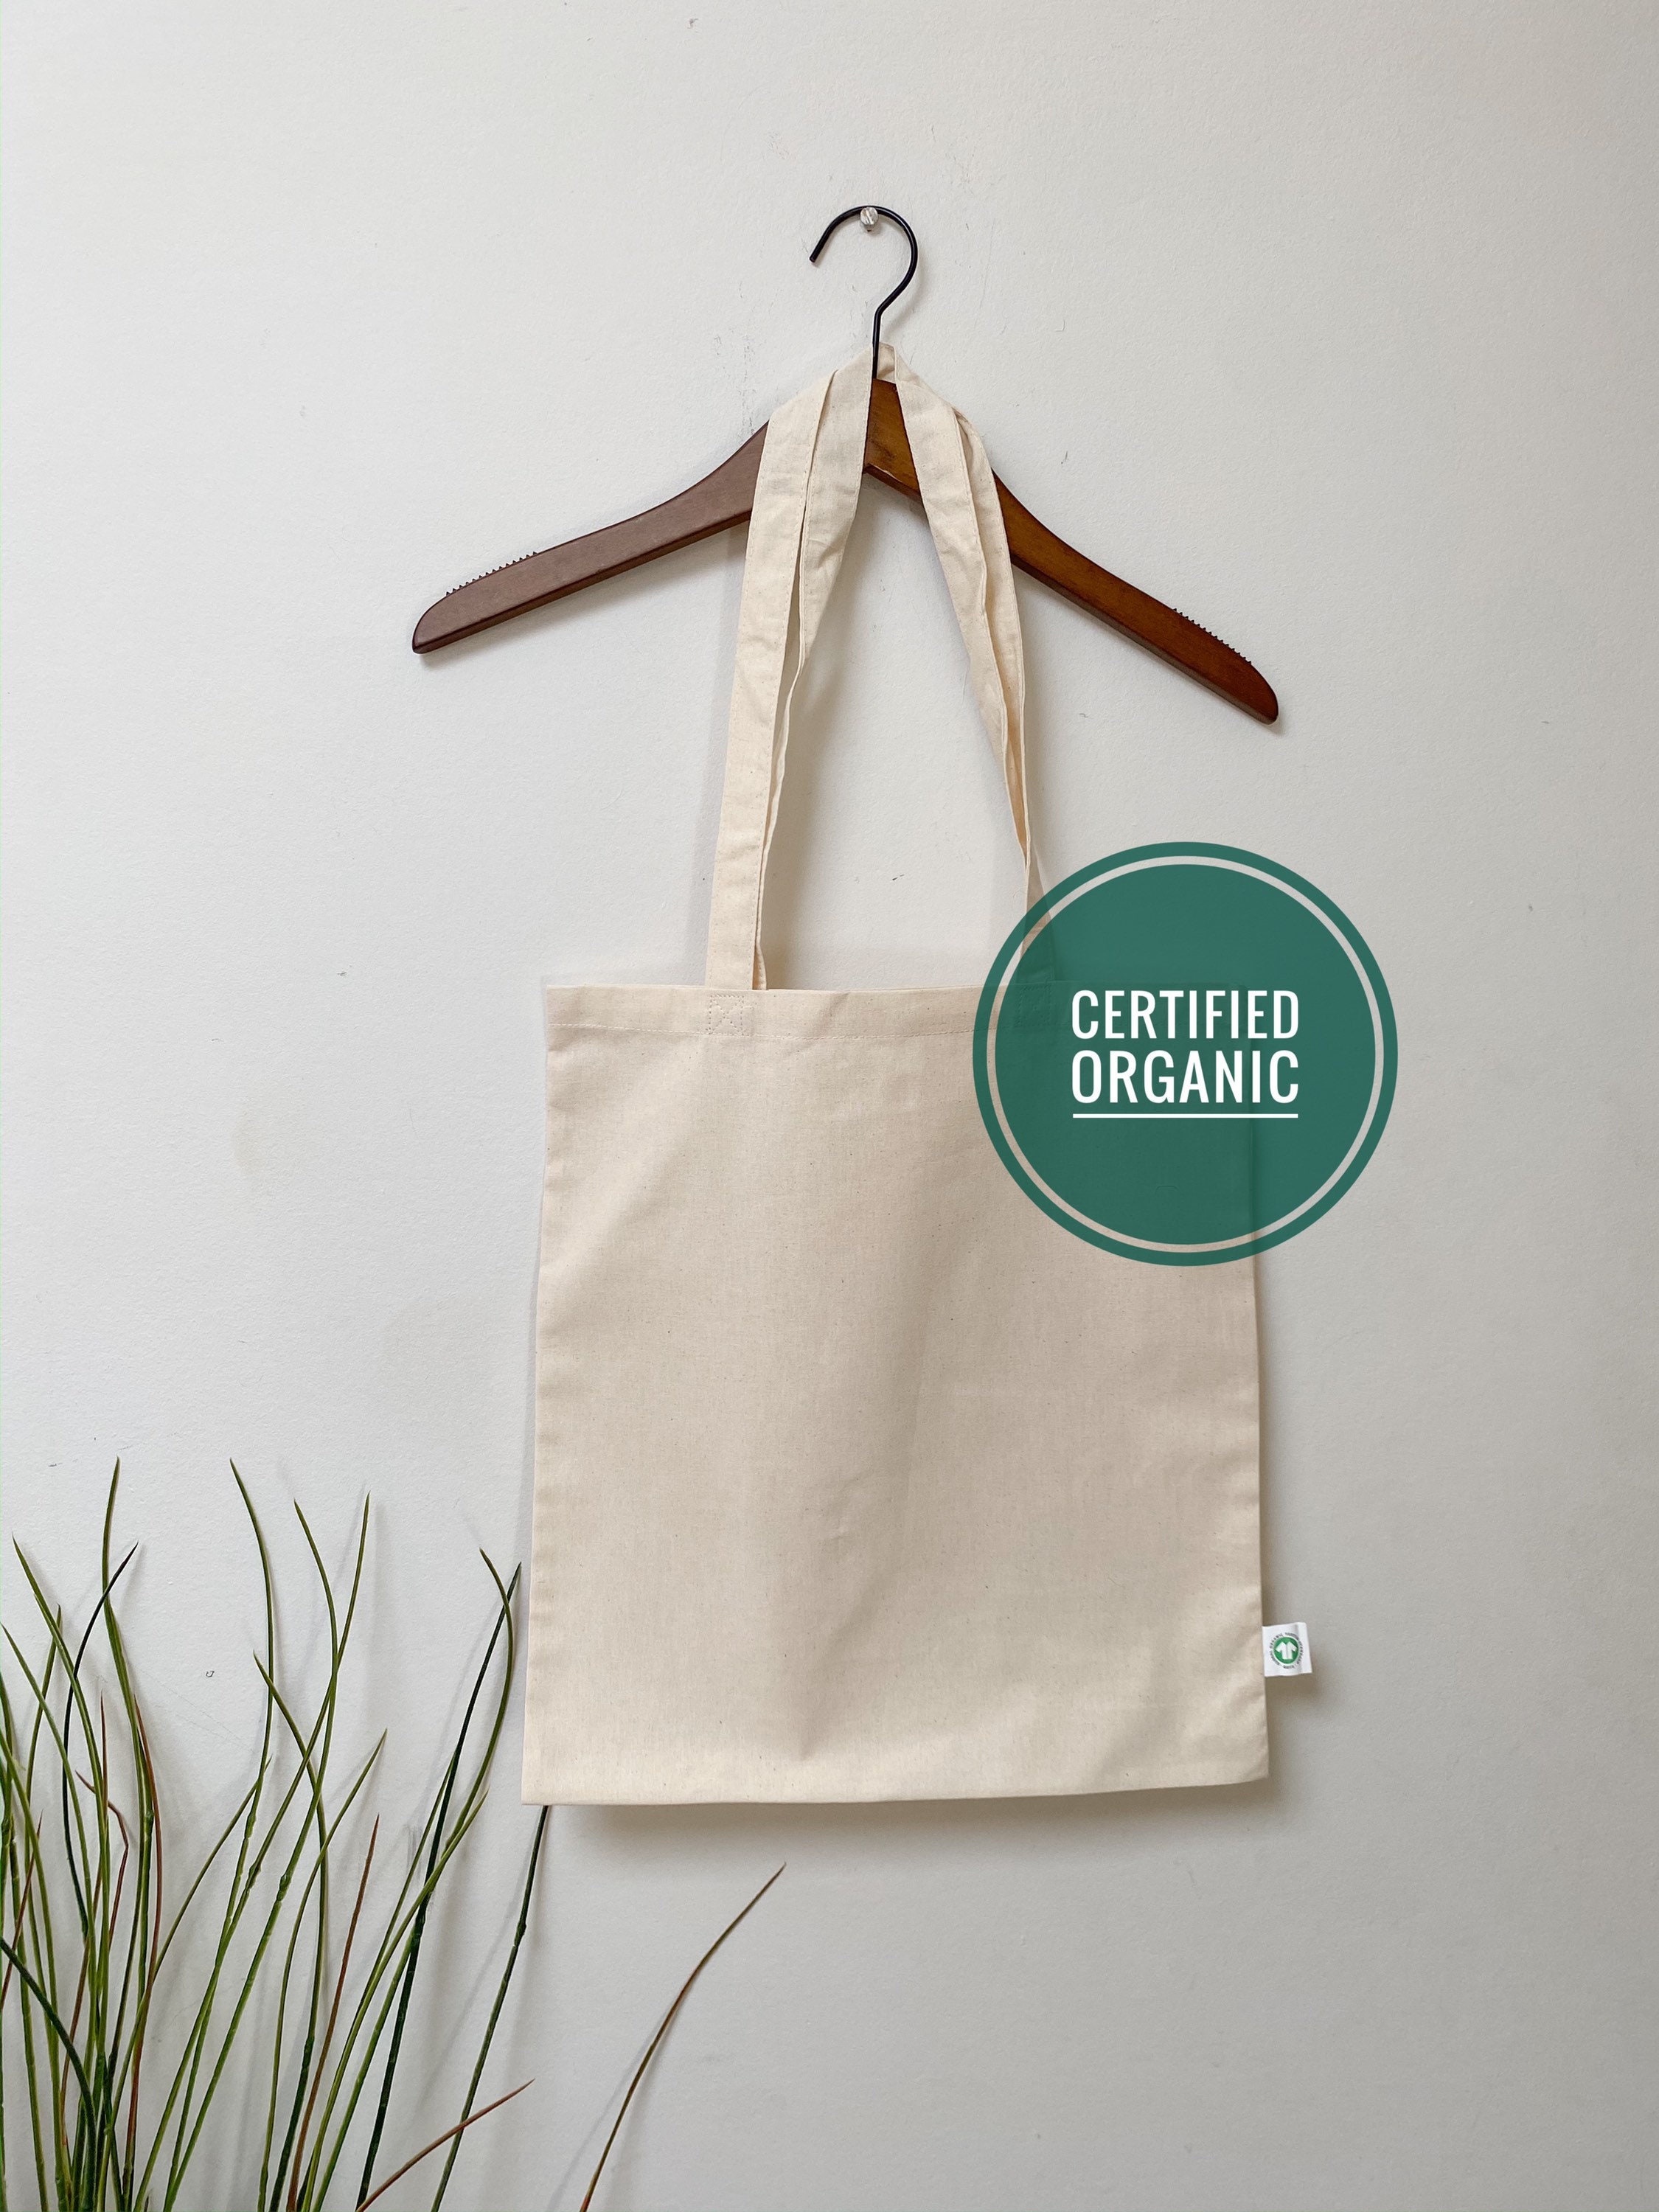 New FACTORY SECONDS Blank Tote Bag Extra Large Heavy Duty Canvas Tote Bags,  DIY Project, Kids Craft Project, School Bag, Reusable Bag 